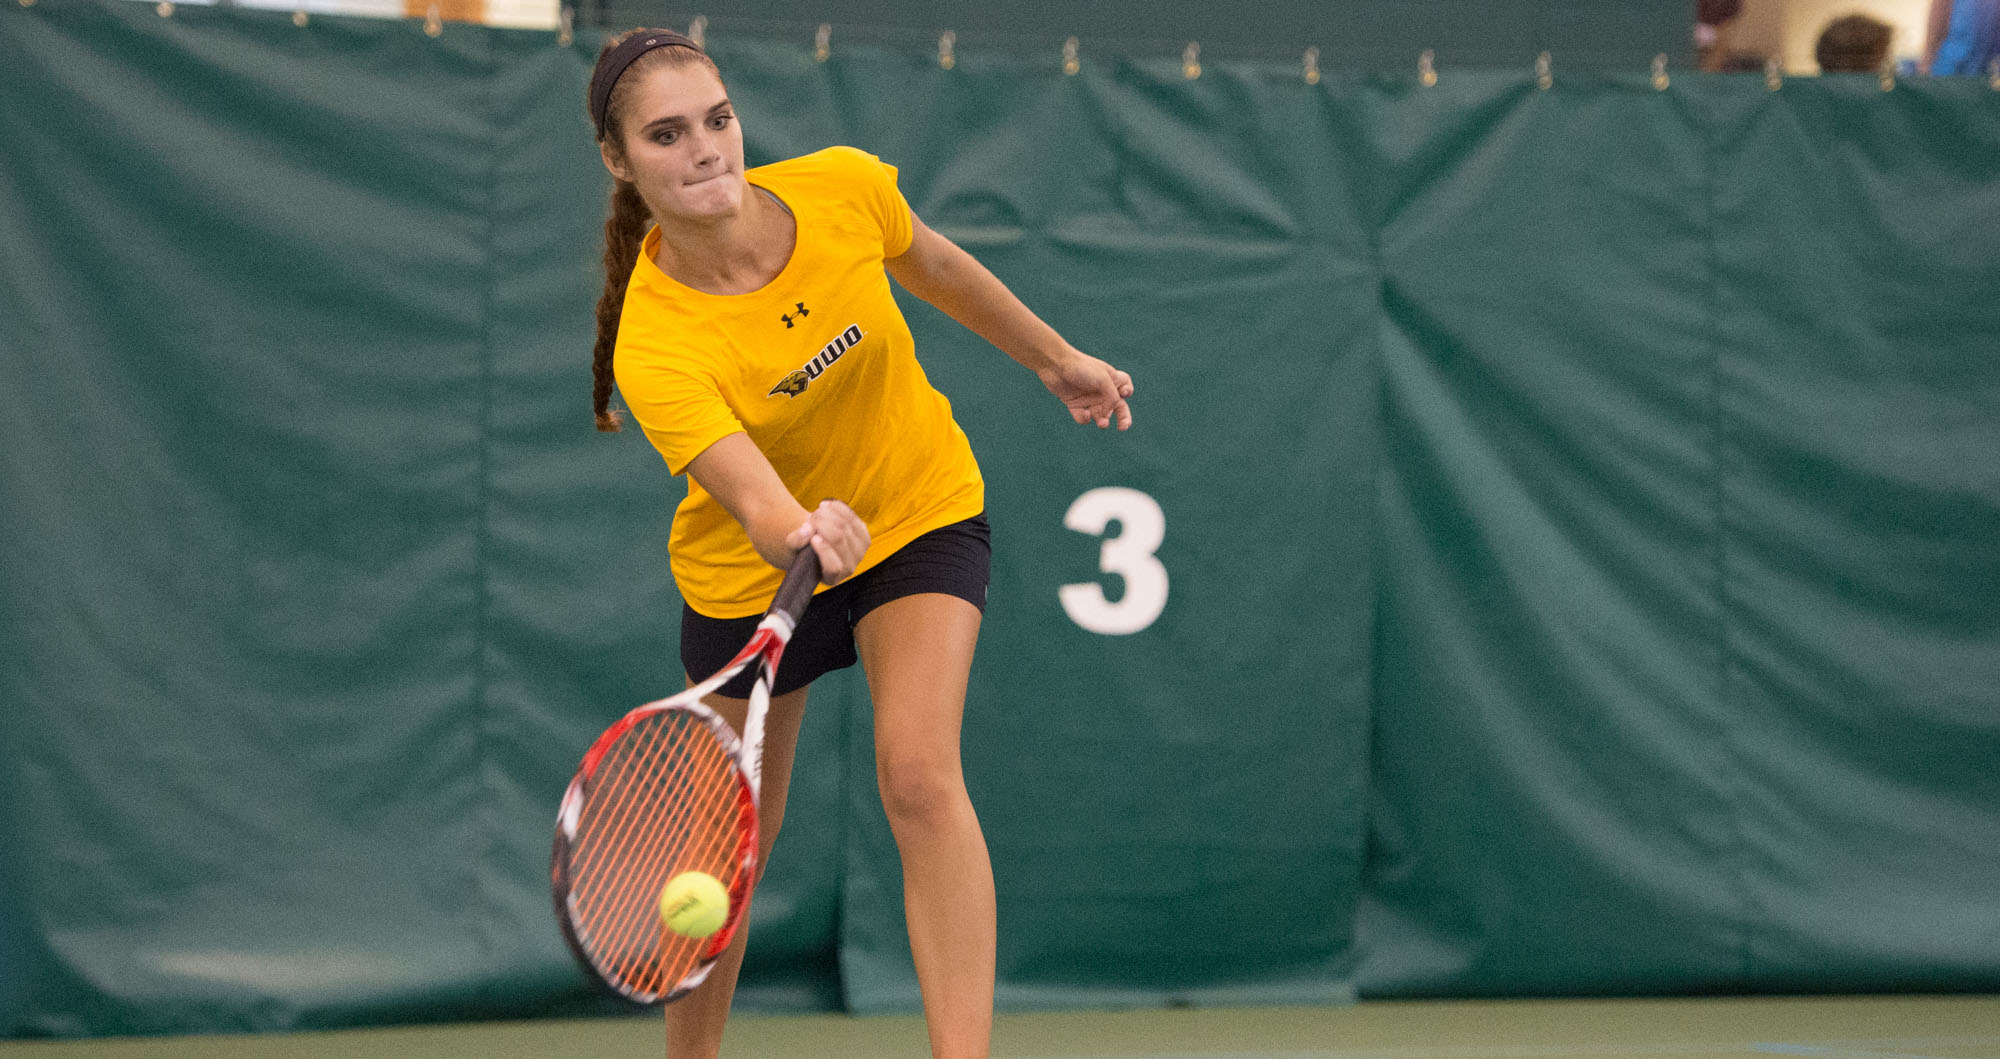 Alyssa Leffler earned the Titans' match-winning point against the Green Knights with her victory at No. 5 singles.